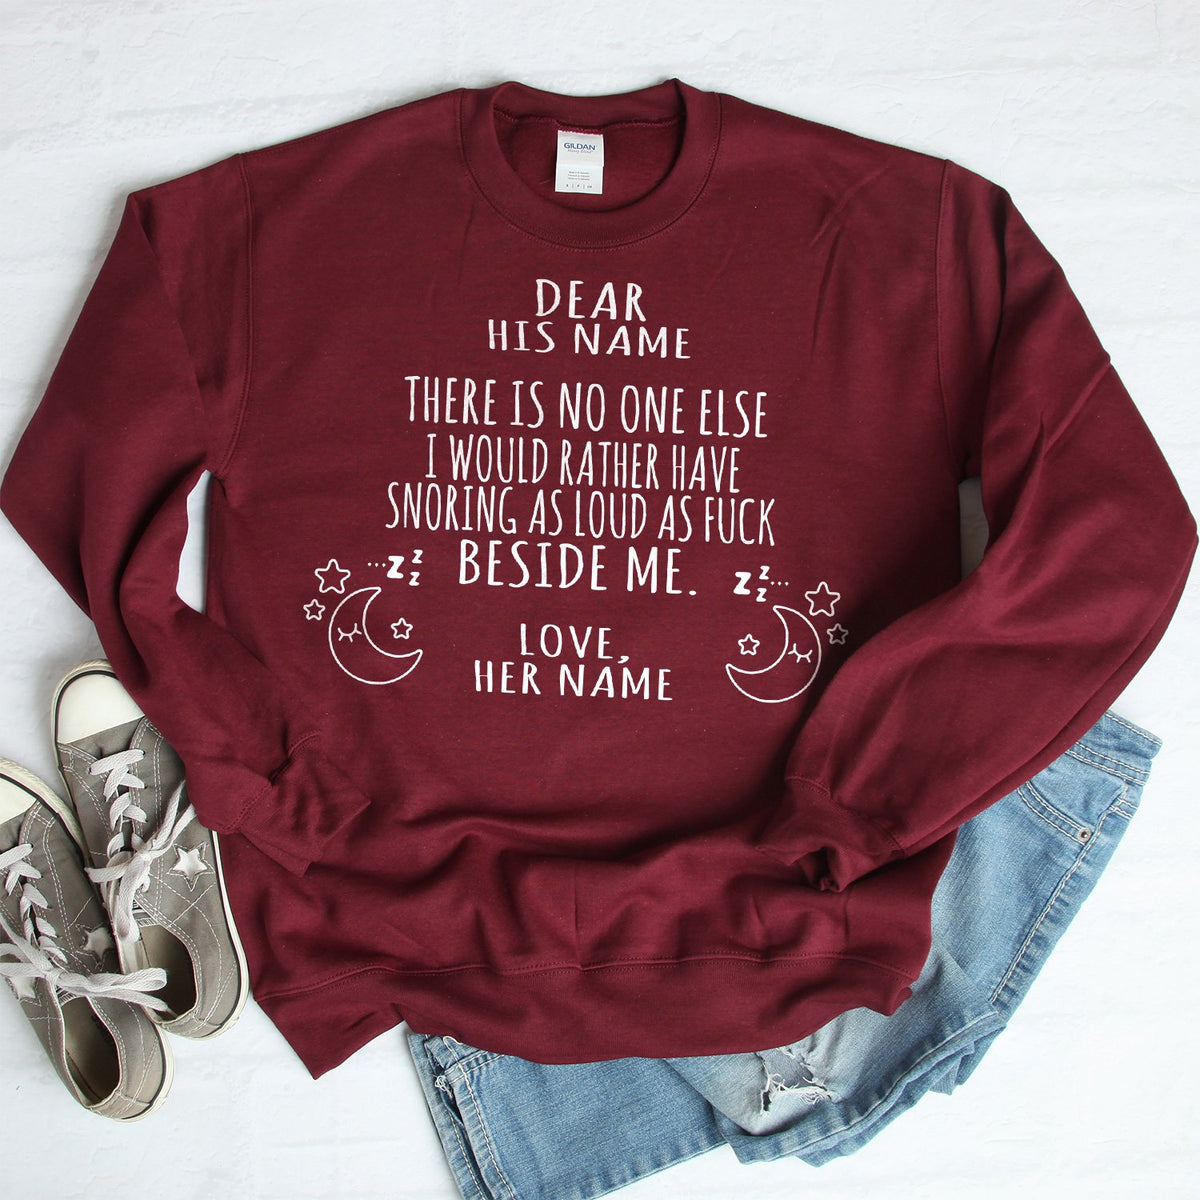 There is No One Else I Would Rather Have Snoring As Loud As Fuck Beside Me - Long Sleeve Heavy Crewneck Sweatshirt